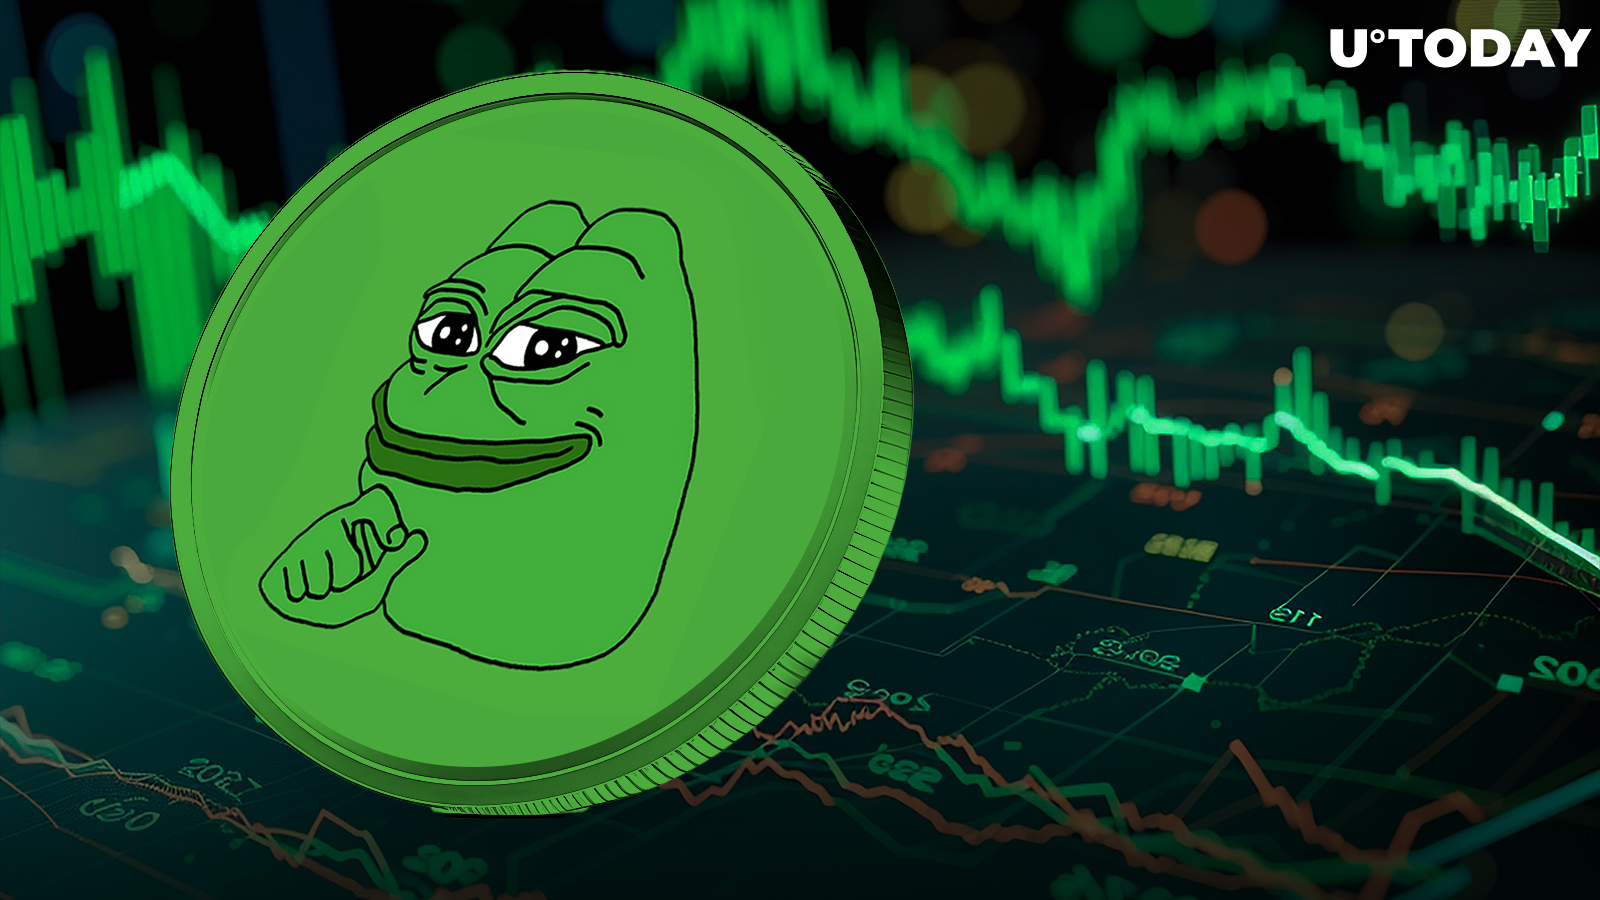 Pepe (PEPE) Might Face More Volatility Due to This Social Trend